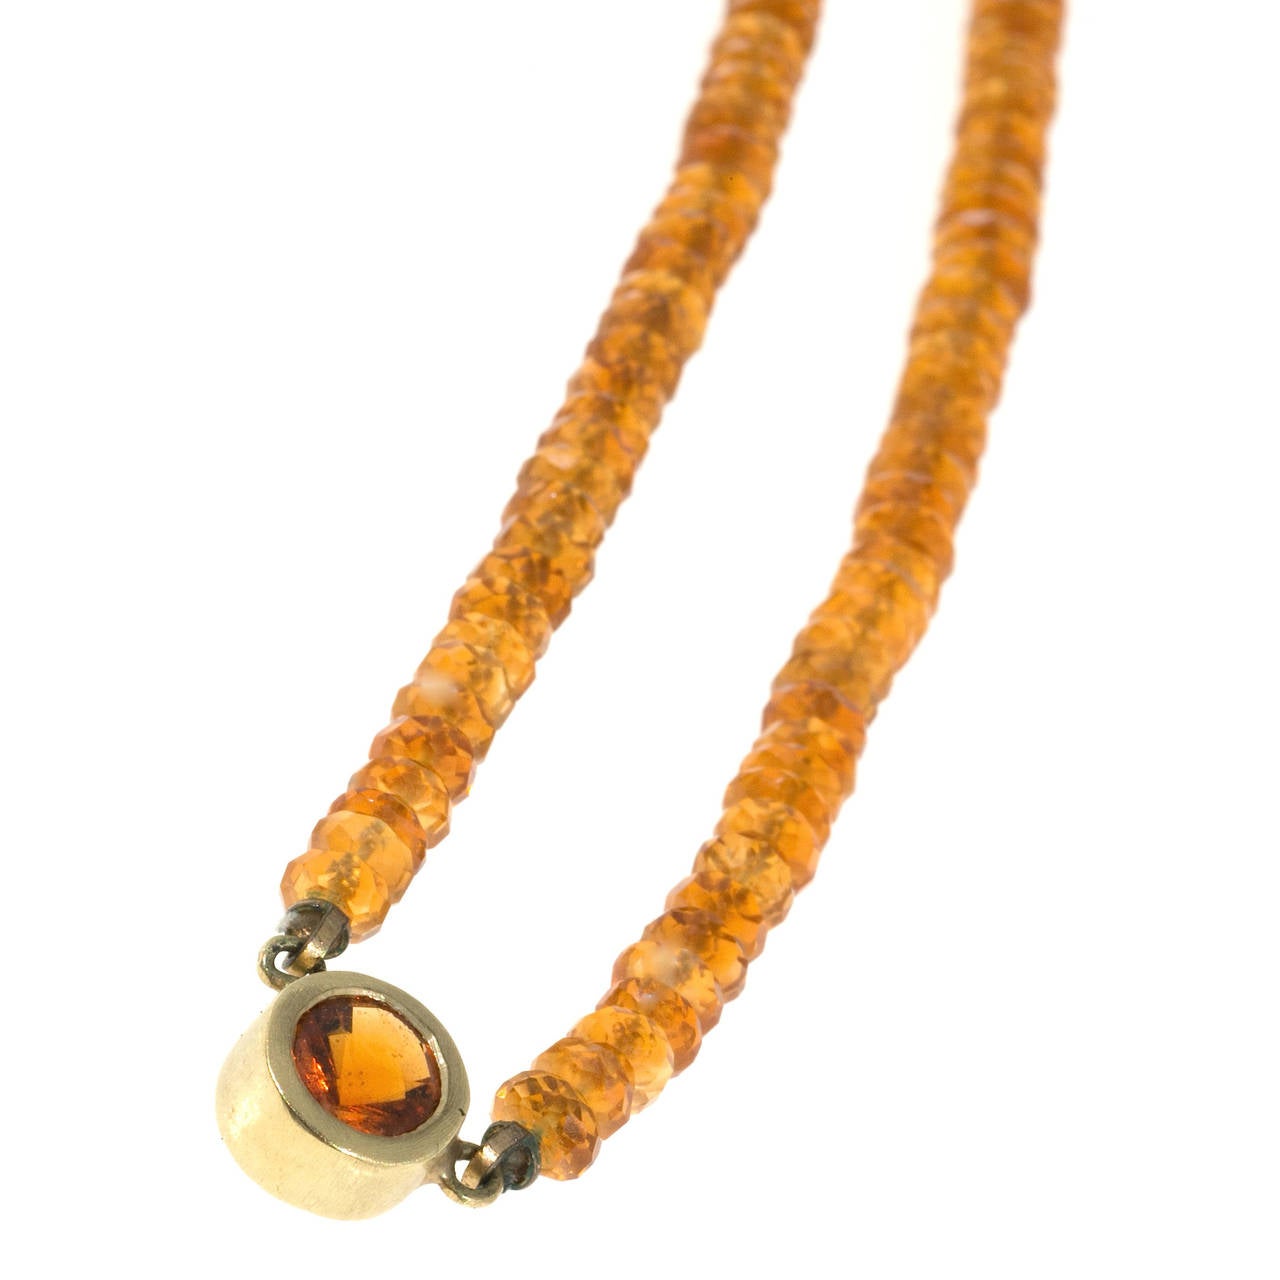 Designer natural untreated Citrine faceted bead necklace. Stamped RR for Robin Rotenier.

1 Natural untreated yellowish orange Citrine Quartz. GIA certificate# 2155048211. Approx. 80.00cts total
145 4.4 to 4.7mm natural Quartz Rondelle beads
18k